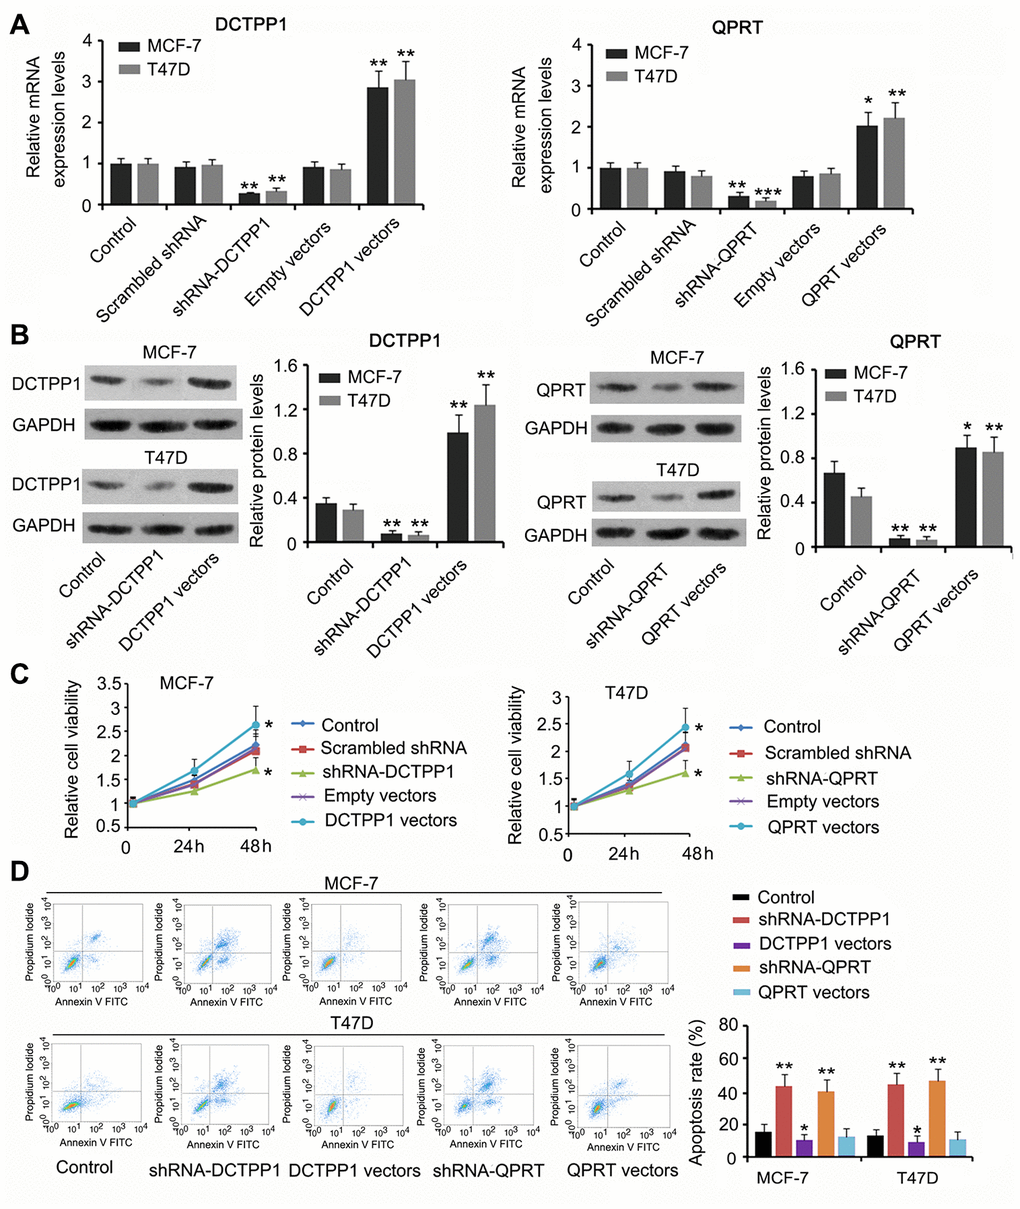 The regulatory effects of DCTPP1 and QPRT on BC cell growth and apoptosis. DCTPP1 and QPRT mRNA (A) and protein (B) levels in MCF-7 and T47D cells were changed after transfection with shRNA-DCTPP1, shRNA-QPRT, and DCTPP1 and QPRT expression vectors. (C) Down-regulation of DCTPP1 or QPRT was associated with reduced viability in both MCF-7 and T47D cells and increased DCTPP1 or QPRT was associated with increased cell viability. (D) The apoptosis rate of MCF-7 and T47D cells increased after knocking down either DCTPP1 or QPRT. DCTPP1 overexpression decreased the apoptosis rate of MCF-7 and T47D cells, and QPRT overexpression only marginally decreased MCF-7 and T47D apoptosis. *PPP